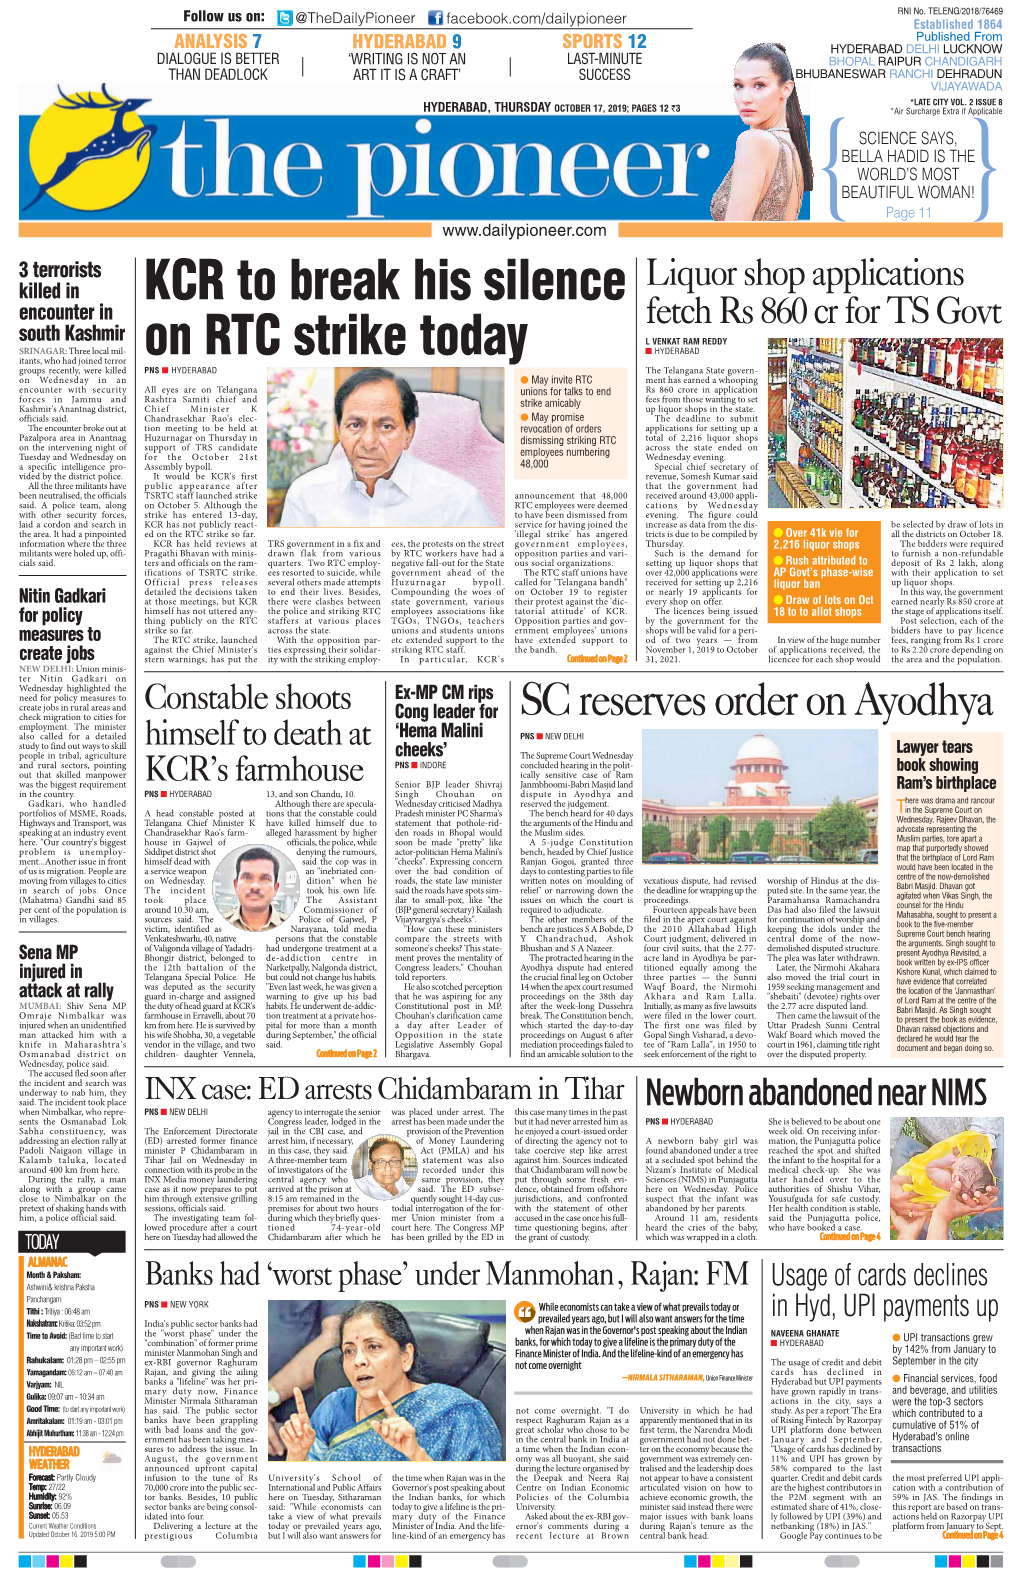 KCR to Break His Silence on RTC Strike Today